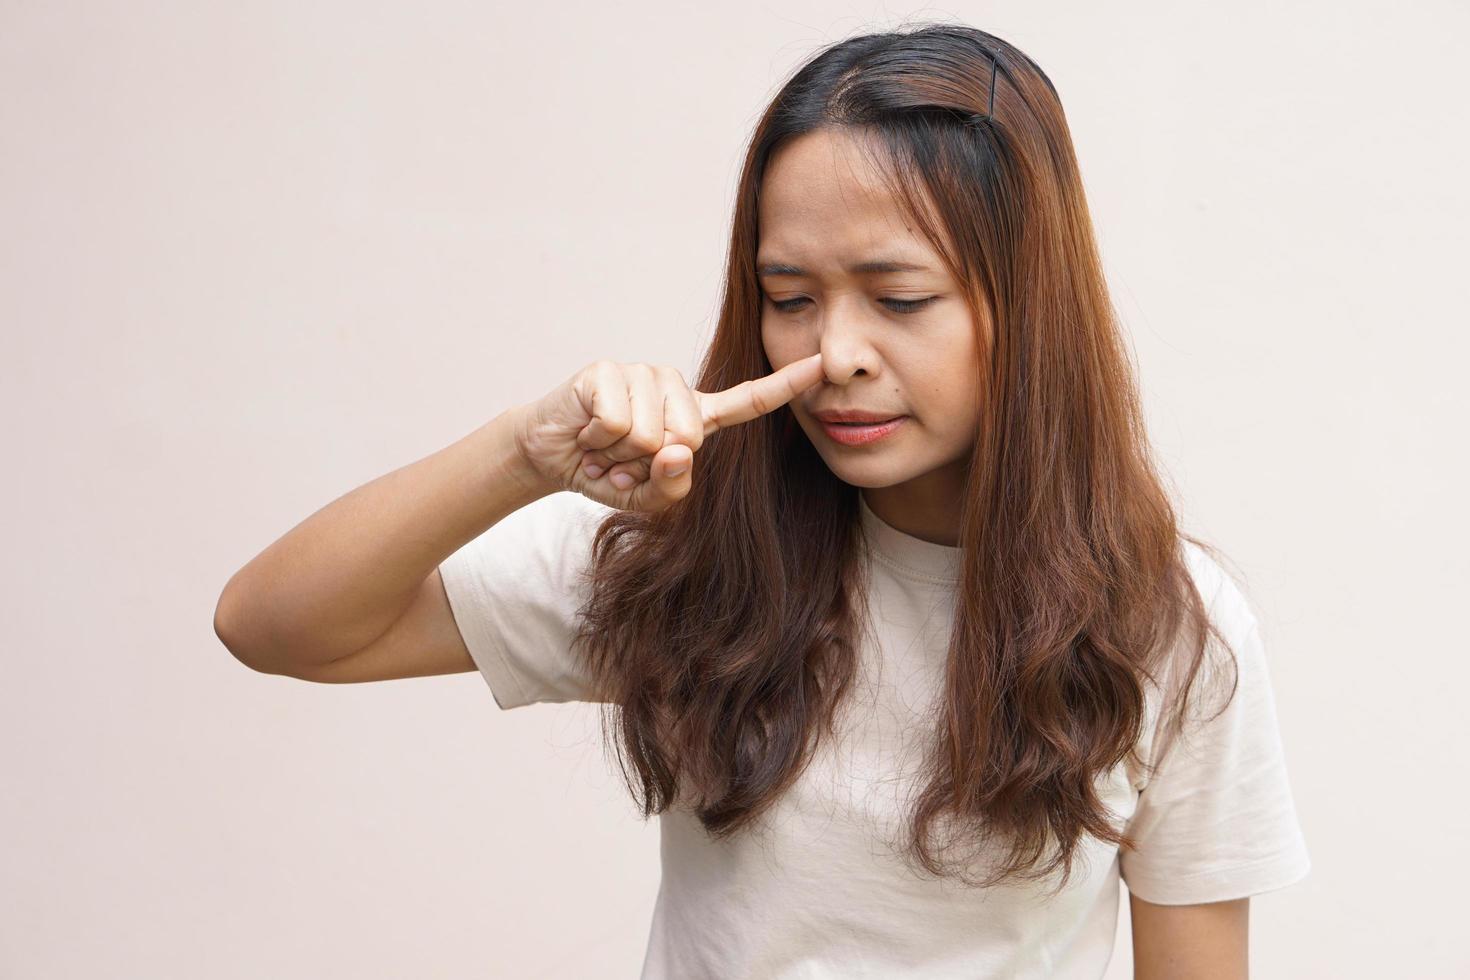 Asian women cover their noses with their hands because they smell bad. photo